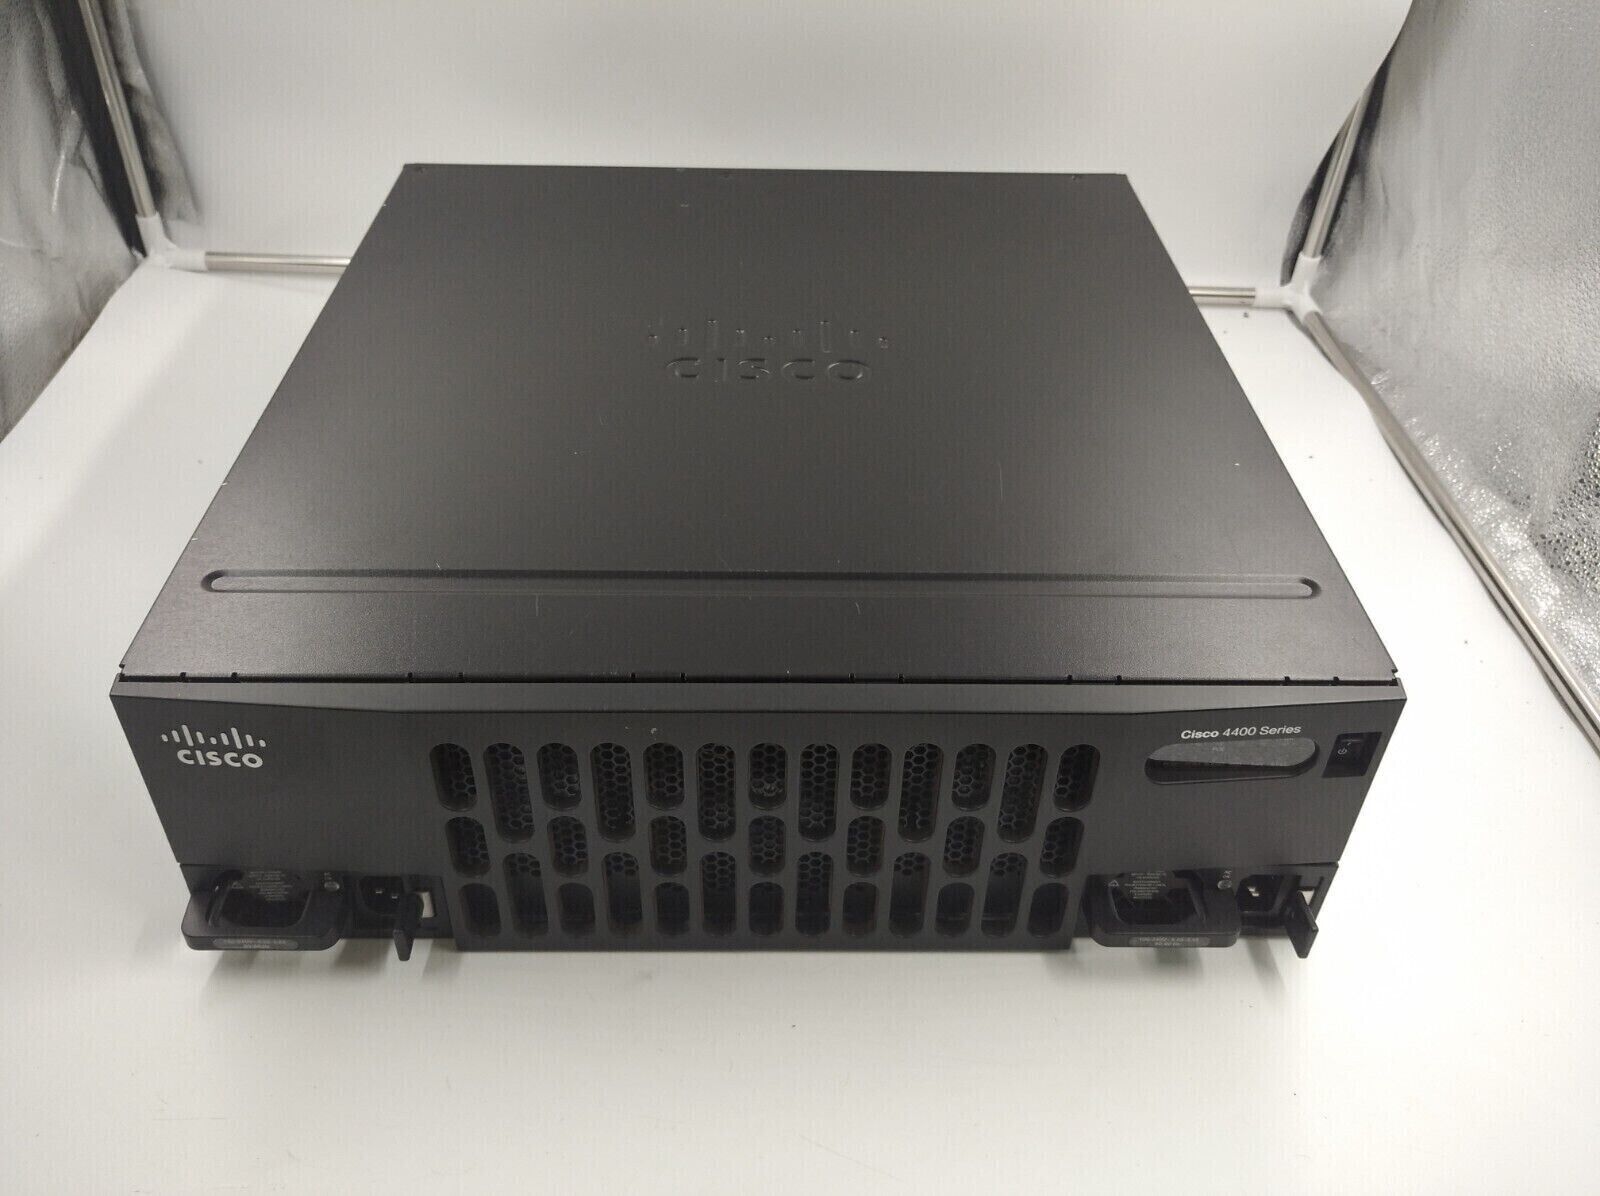 Genuine Cisco ISR4461-K9 Integrated Services Router V02 with 2 PSU & Rack Mounts